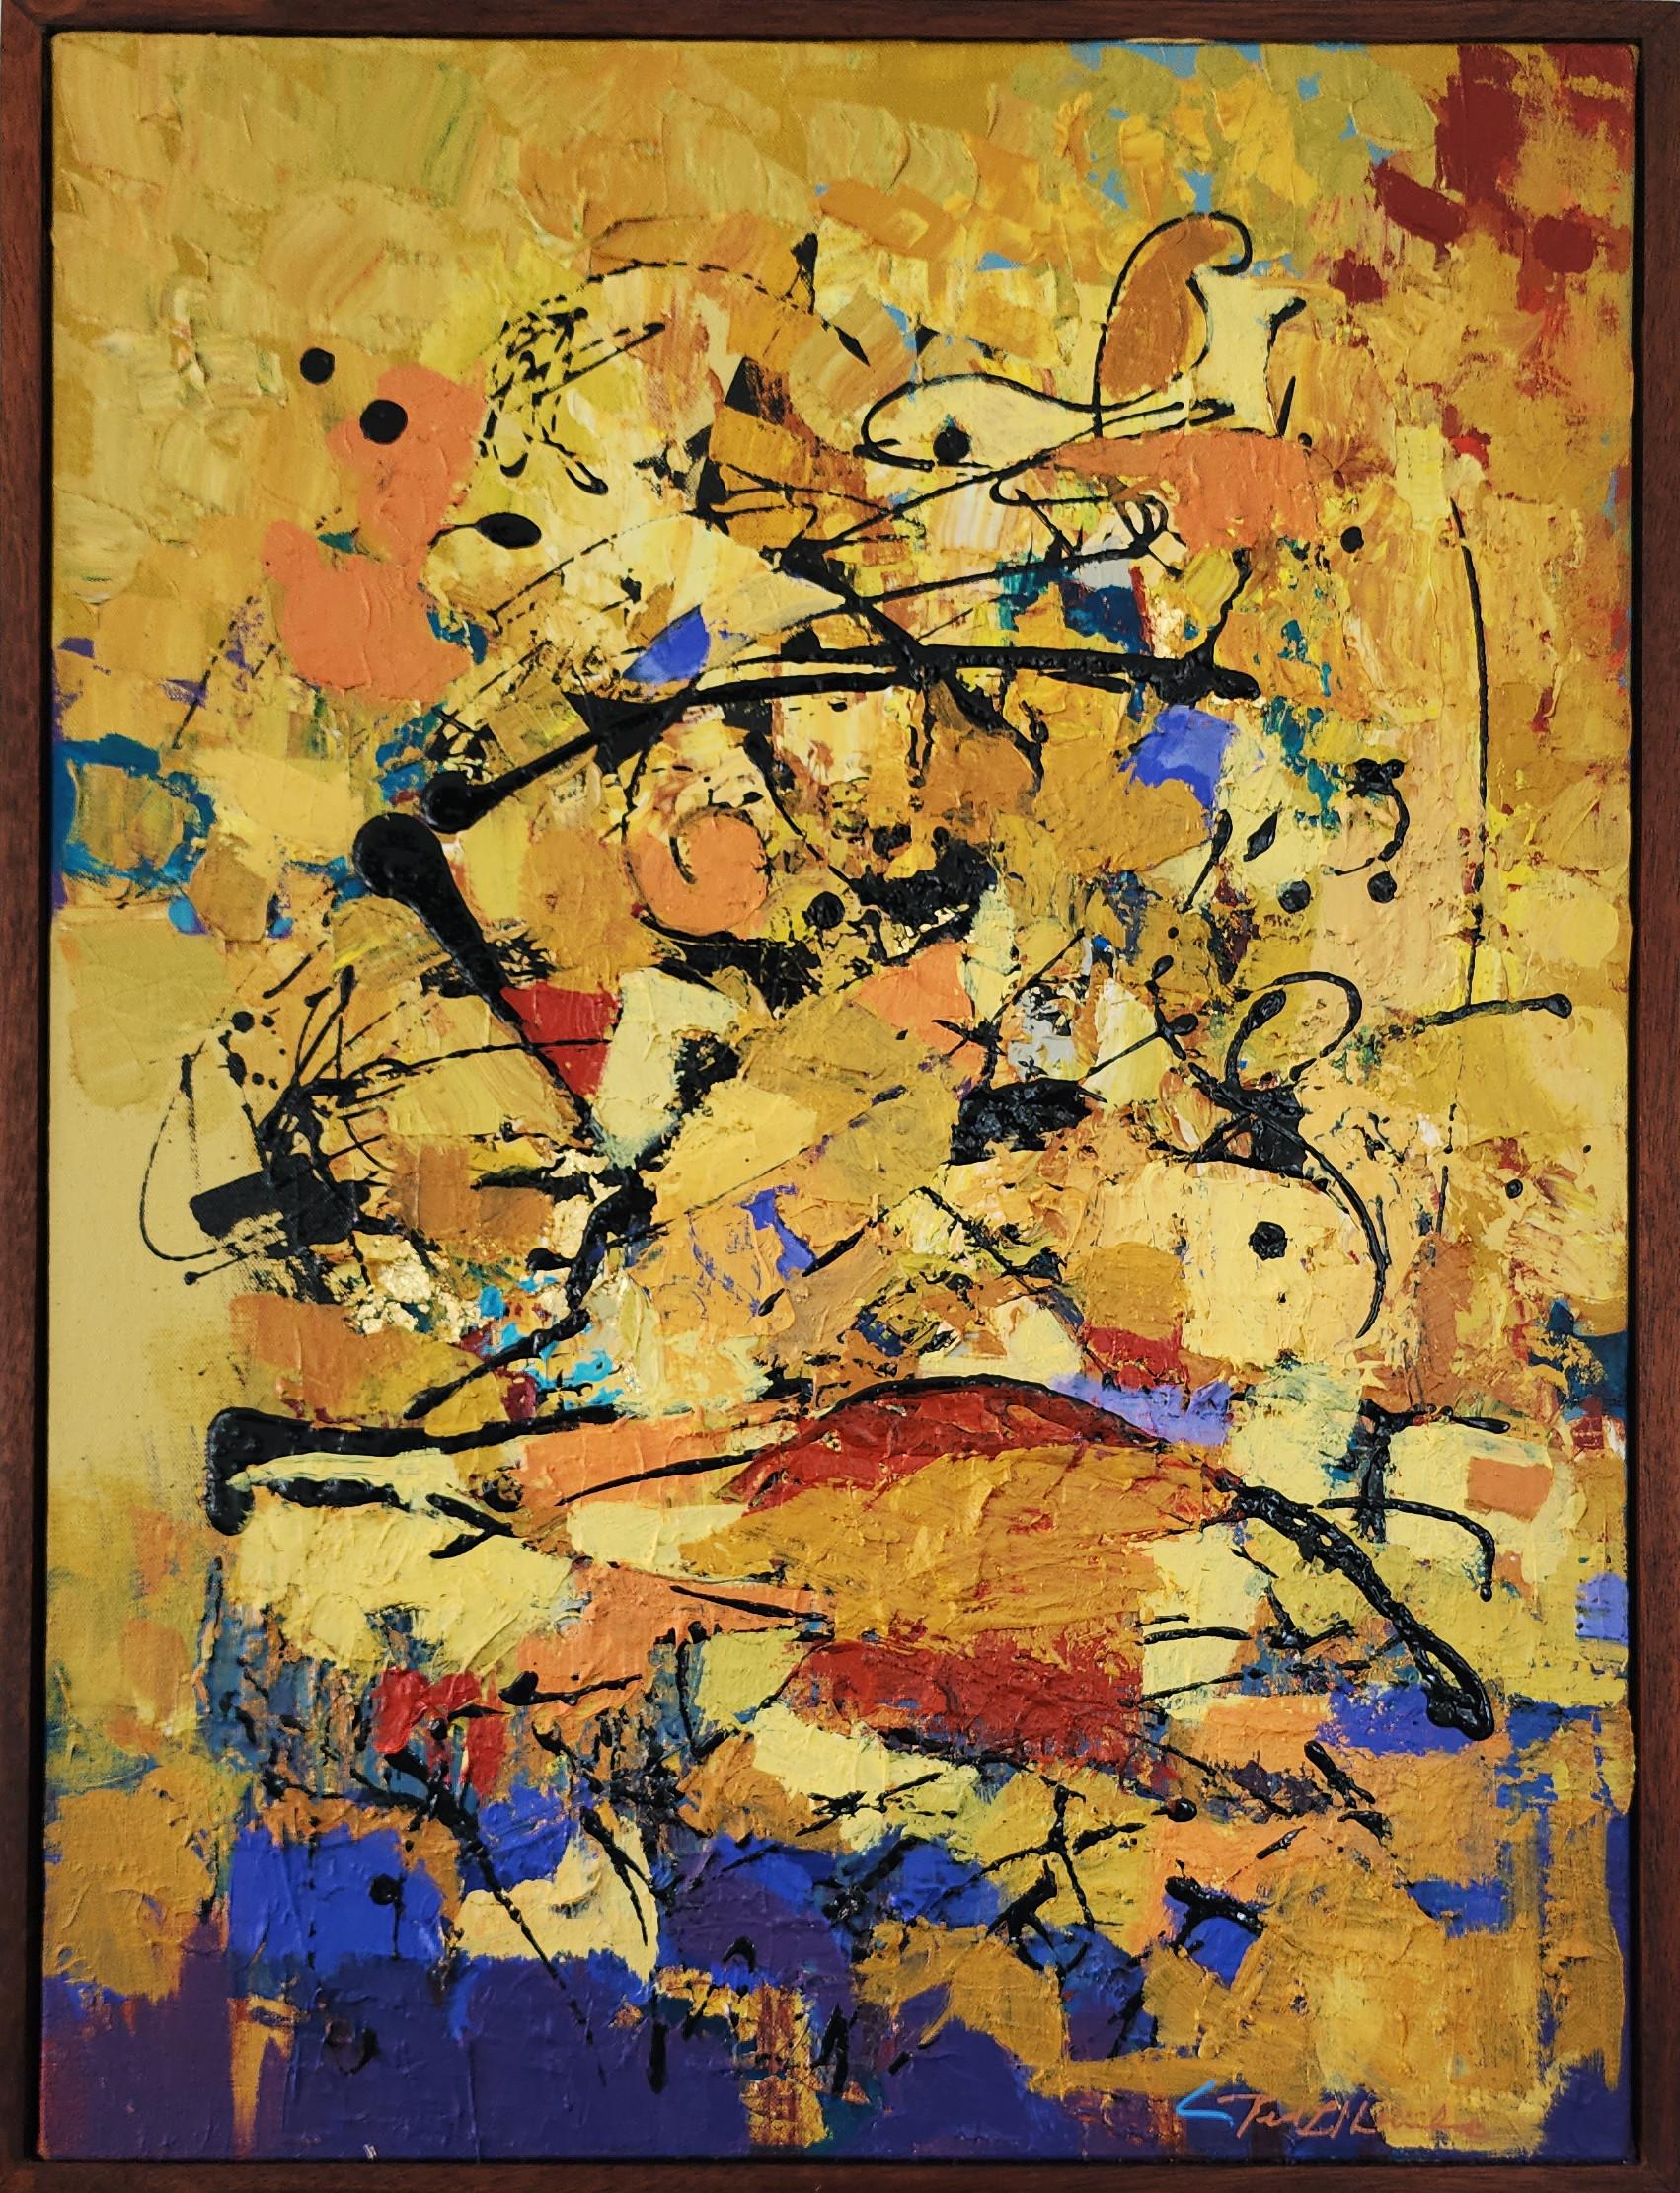 Ted Hinrichs Abstract Painting - Energy (Splatter, Beige, Brown, Gold Leaf, Blue, Red, Black, Abstraction))